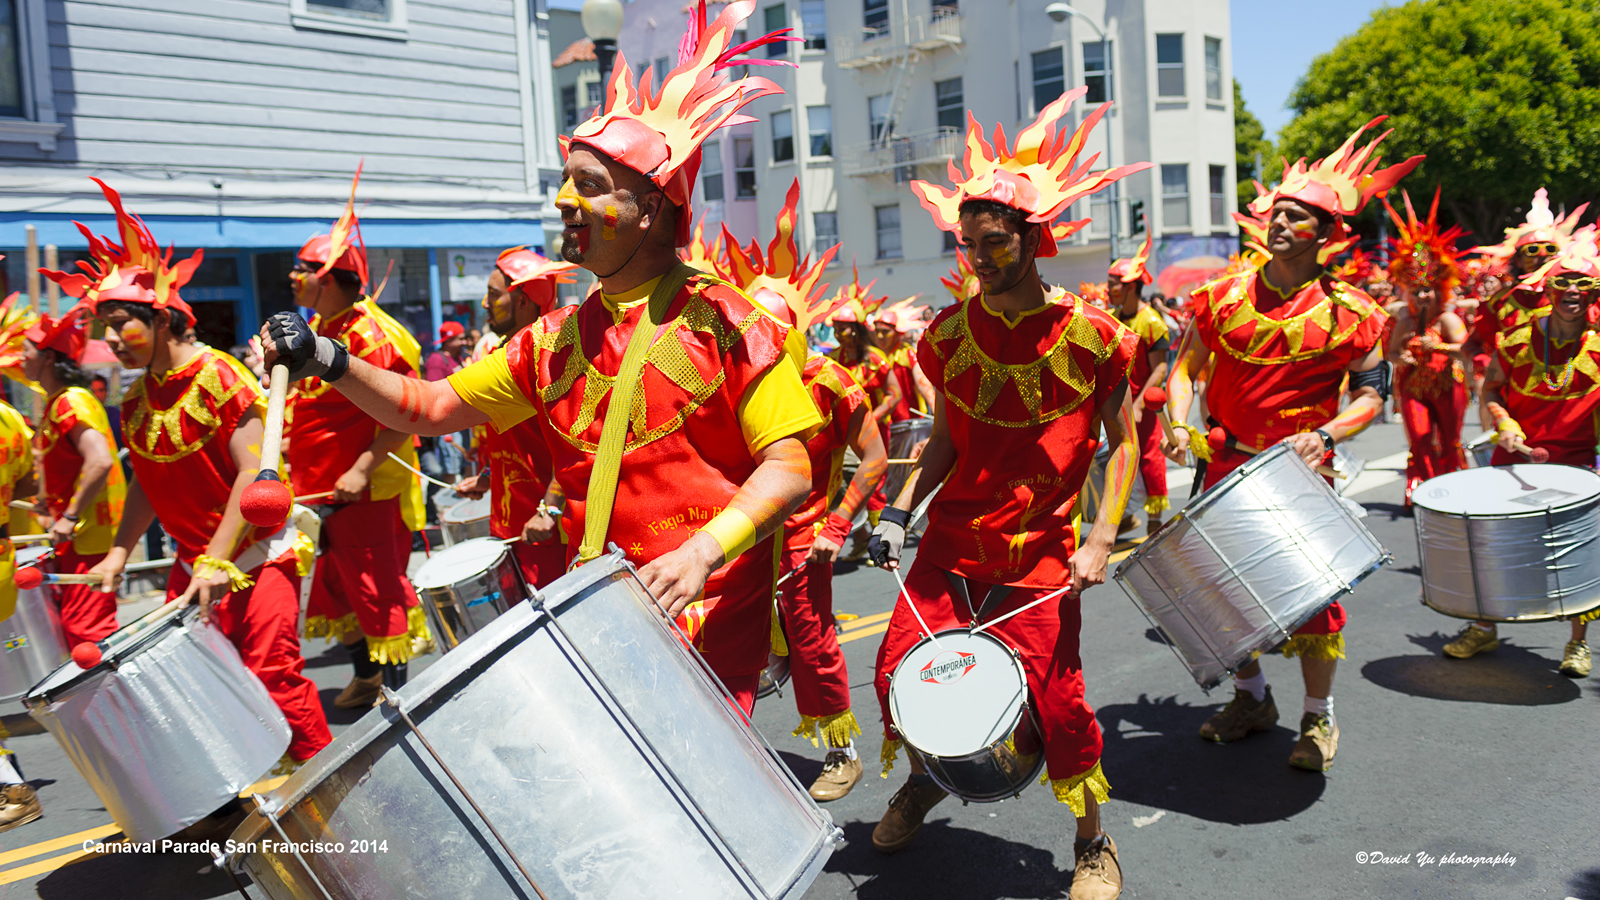 Drummers playing during the Carnaval Parade